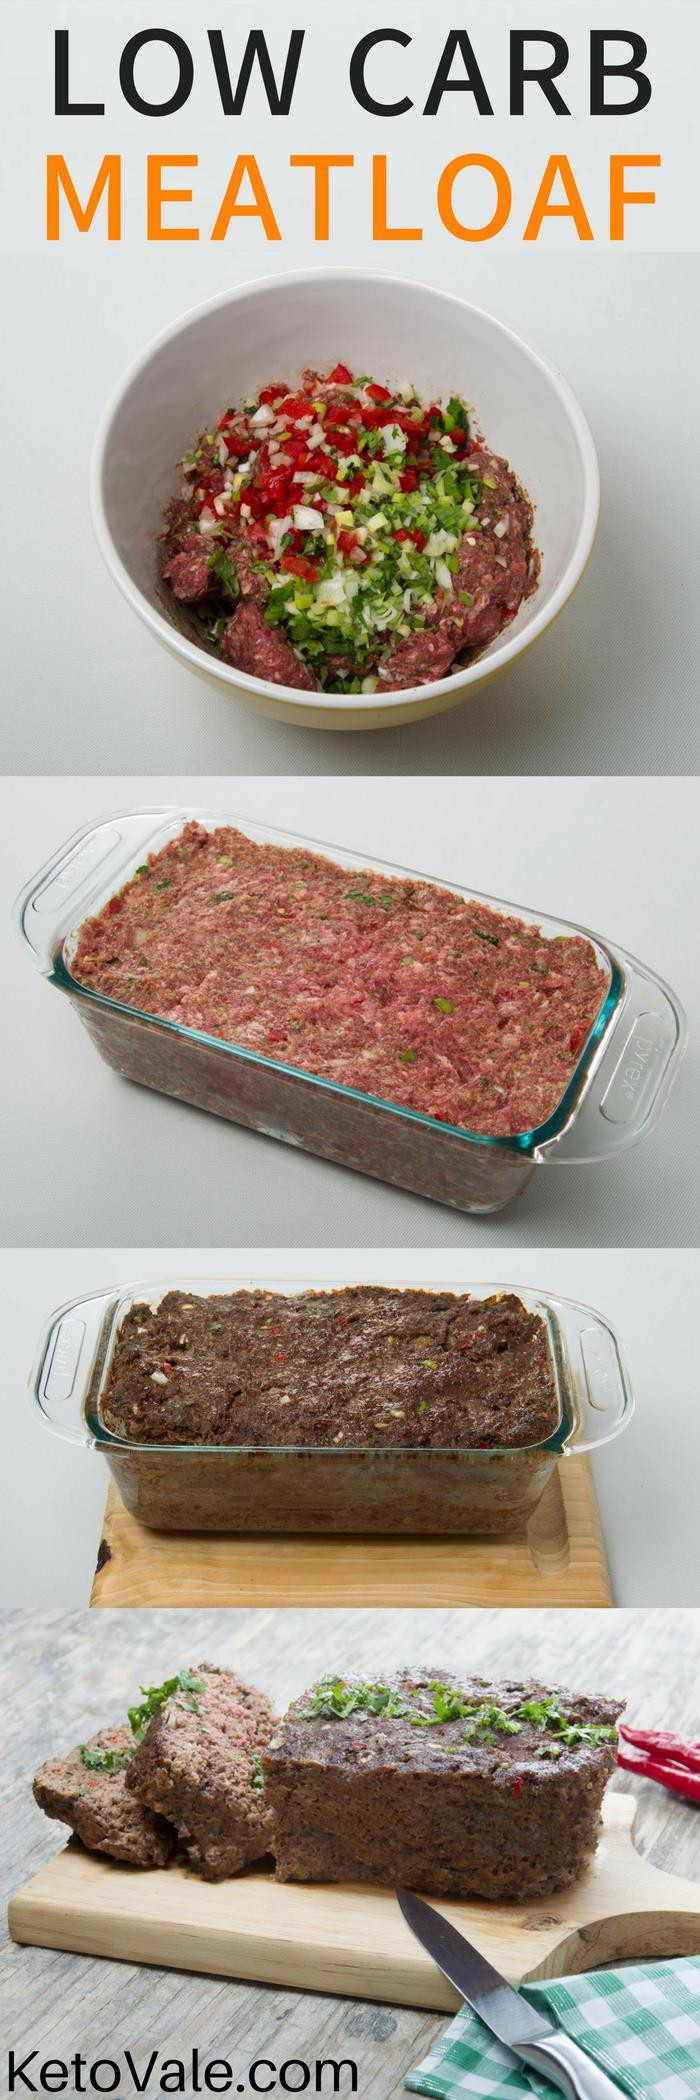 Low Carb Meatloaf Recipe
 Easy Beef Meatloaf Low Carb Recipe